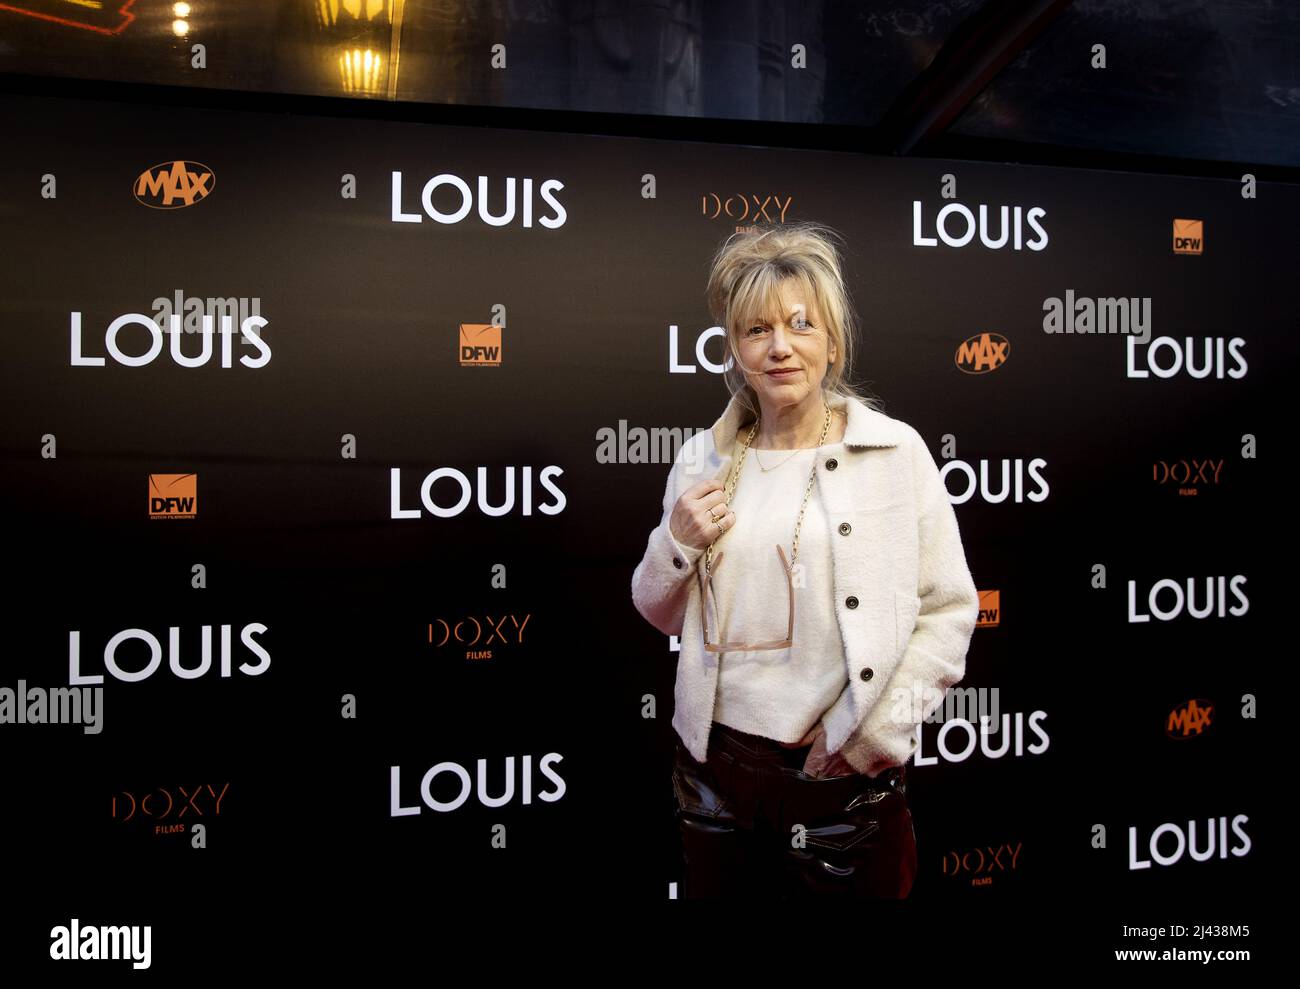 Amsterdam, Netherlands. 11th Apr, 2022. 2022-04-11 20:00:06 AMSTERDAM - Johanna ter Steege on the red carpet prior to the premiere of LOUIS. The documentary is about the life of national coach Louis van Gaal. ANP KIPPA KOEN VAN WEEL netherlands out - belgium out Credit: ANP/Alamy Live News Stock Photo